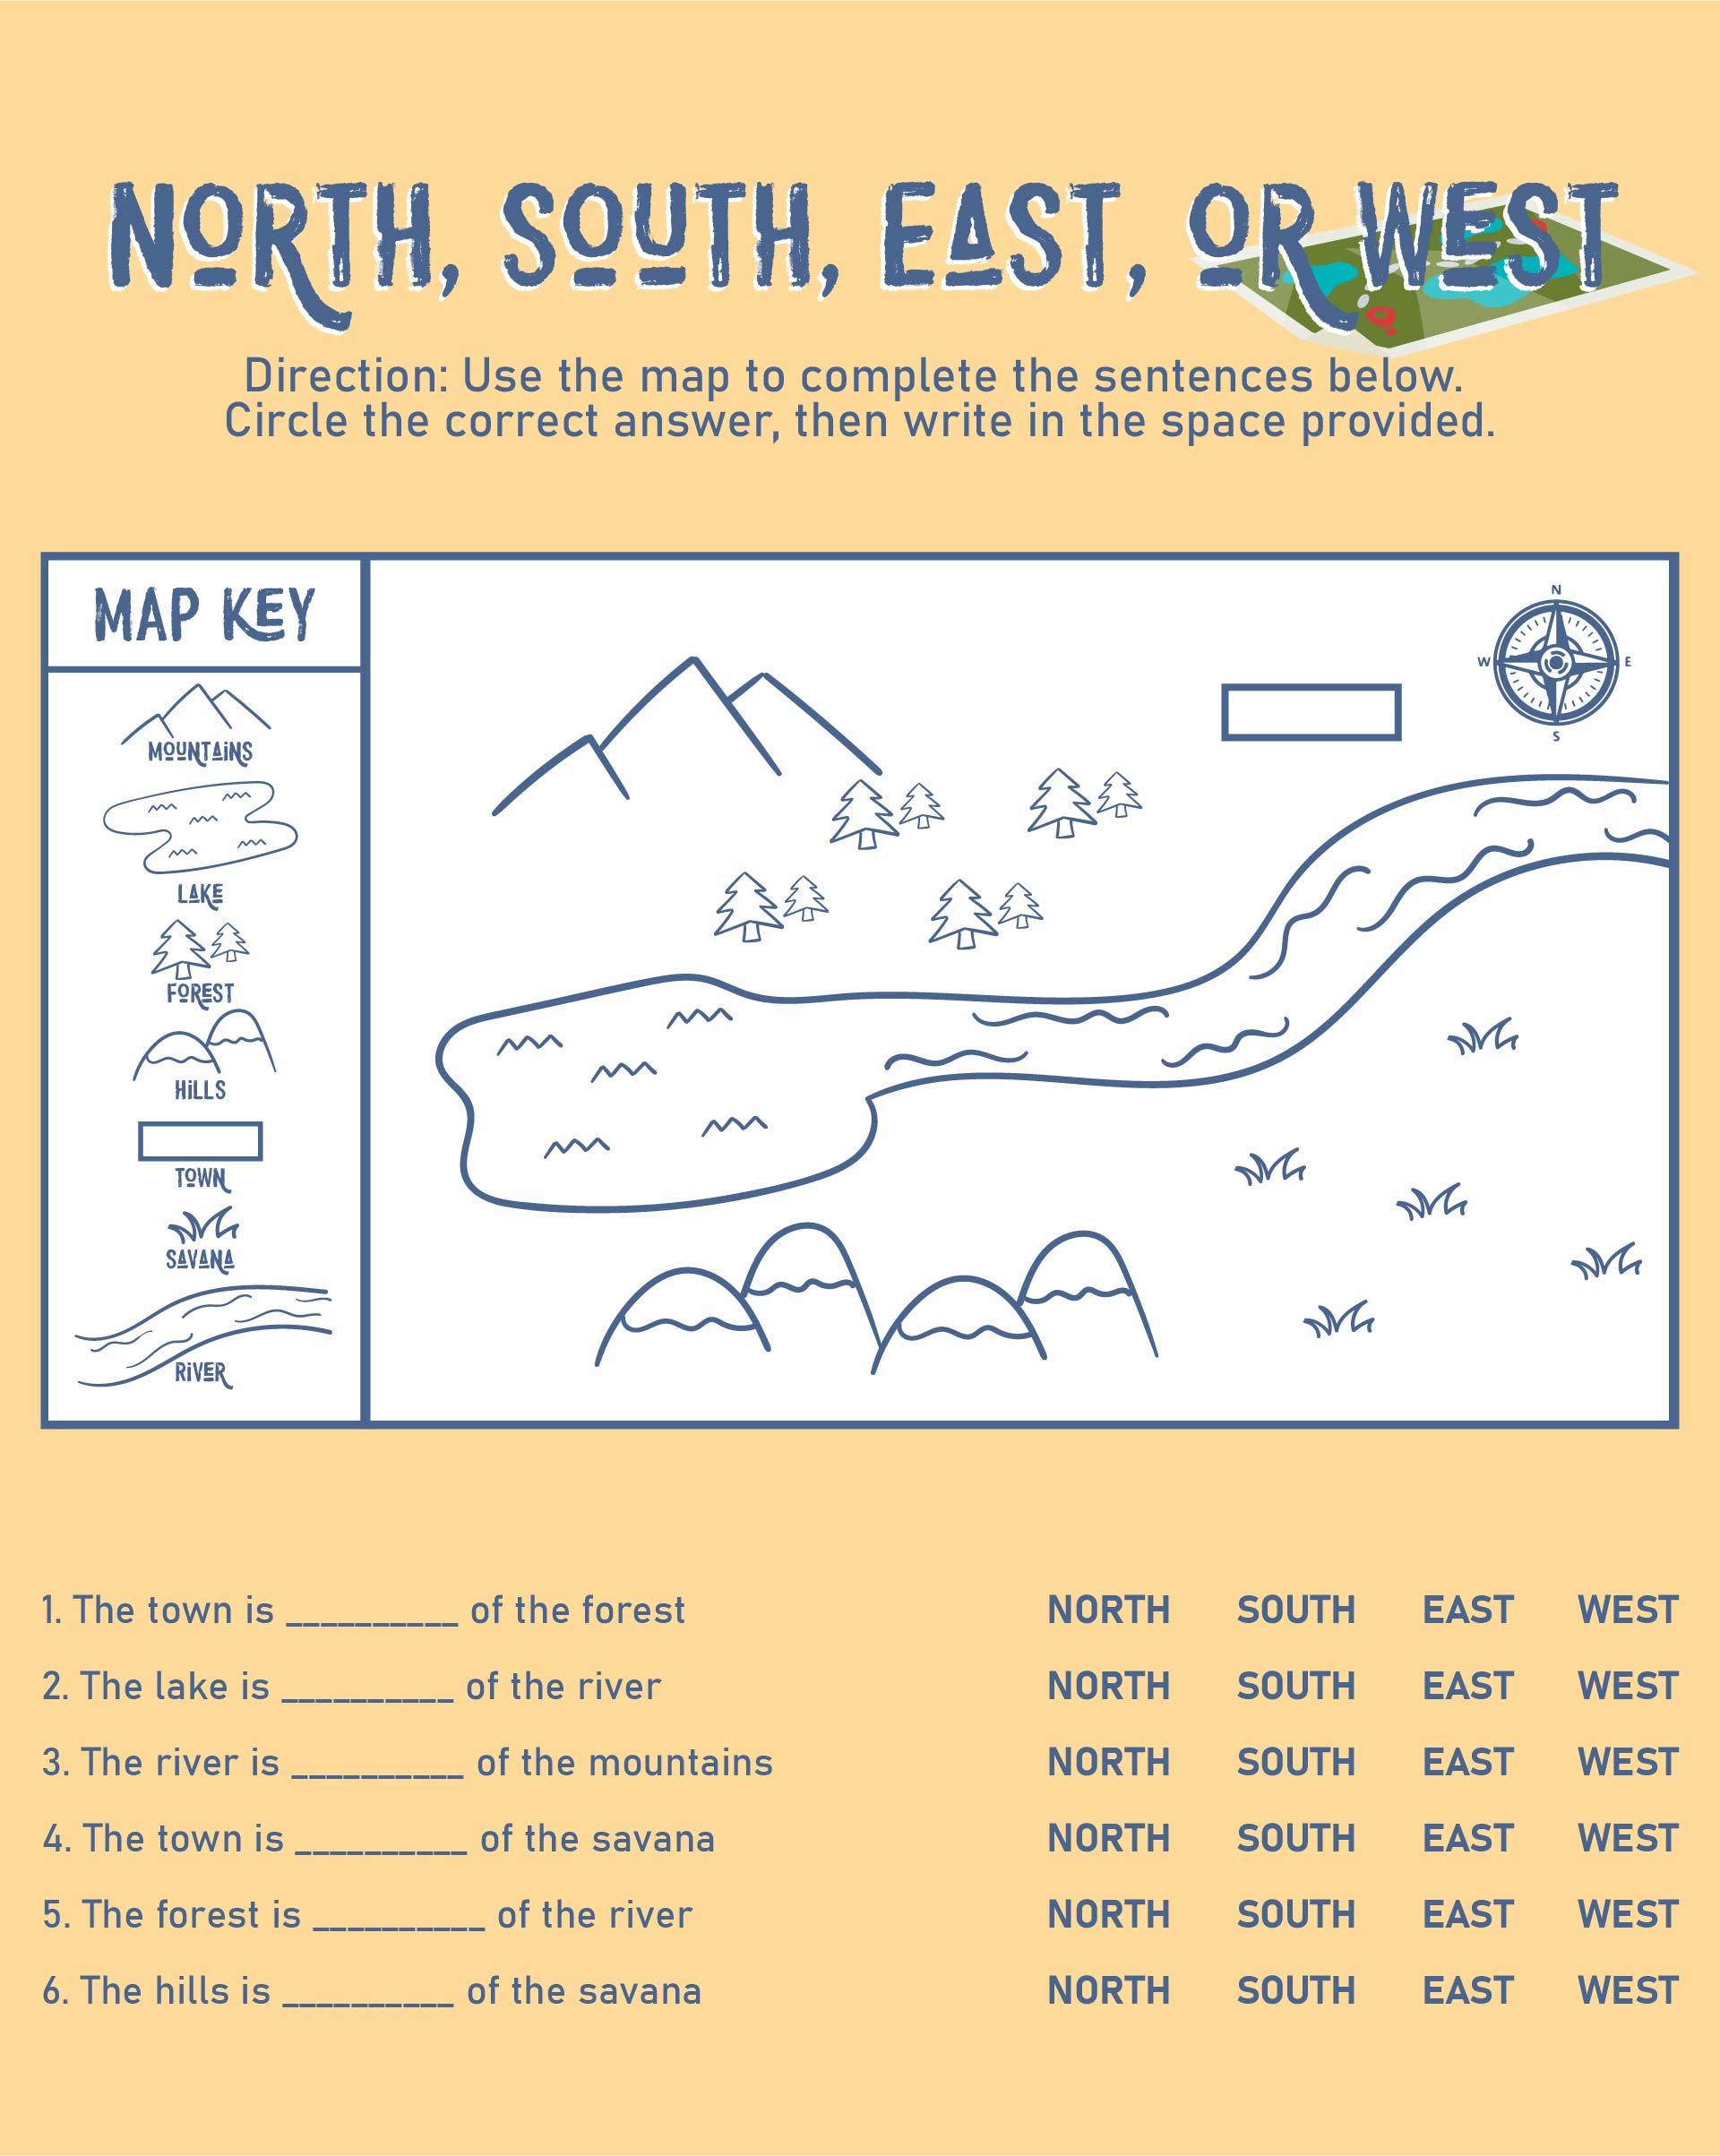 Camping Printable Activities